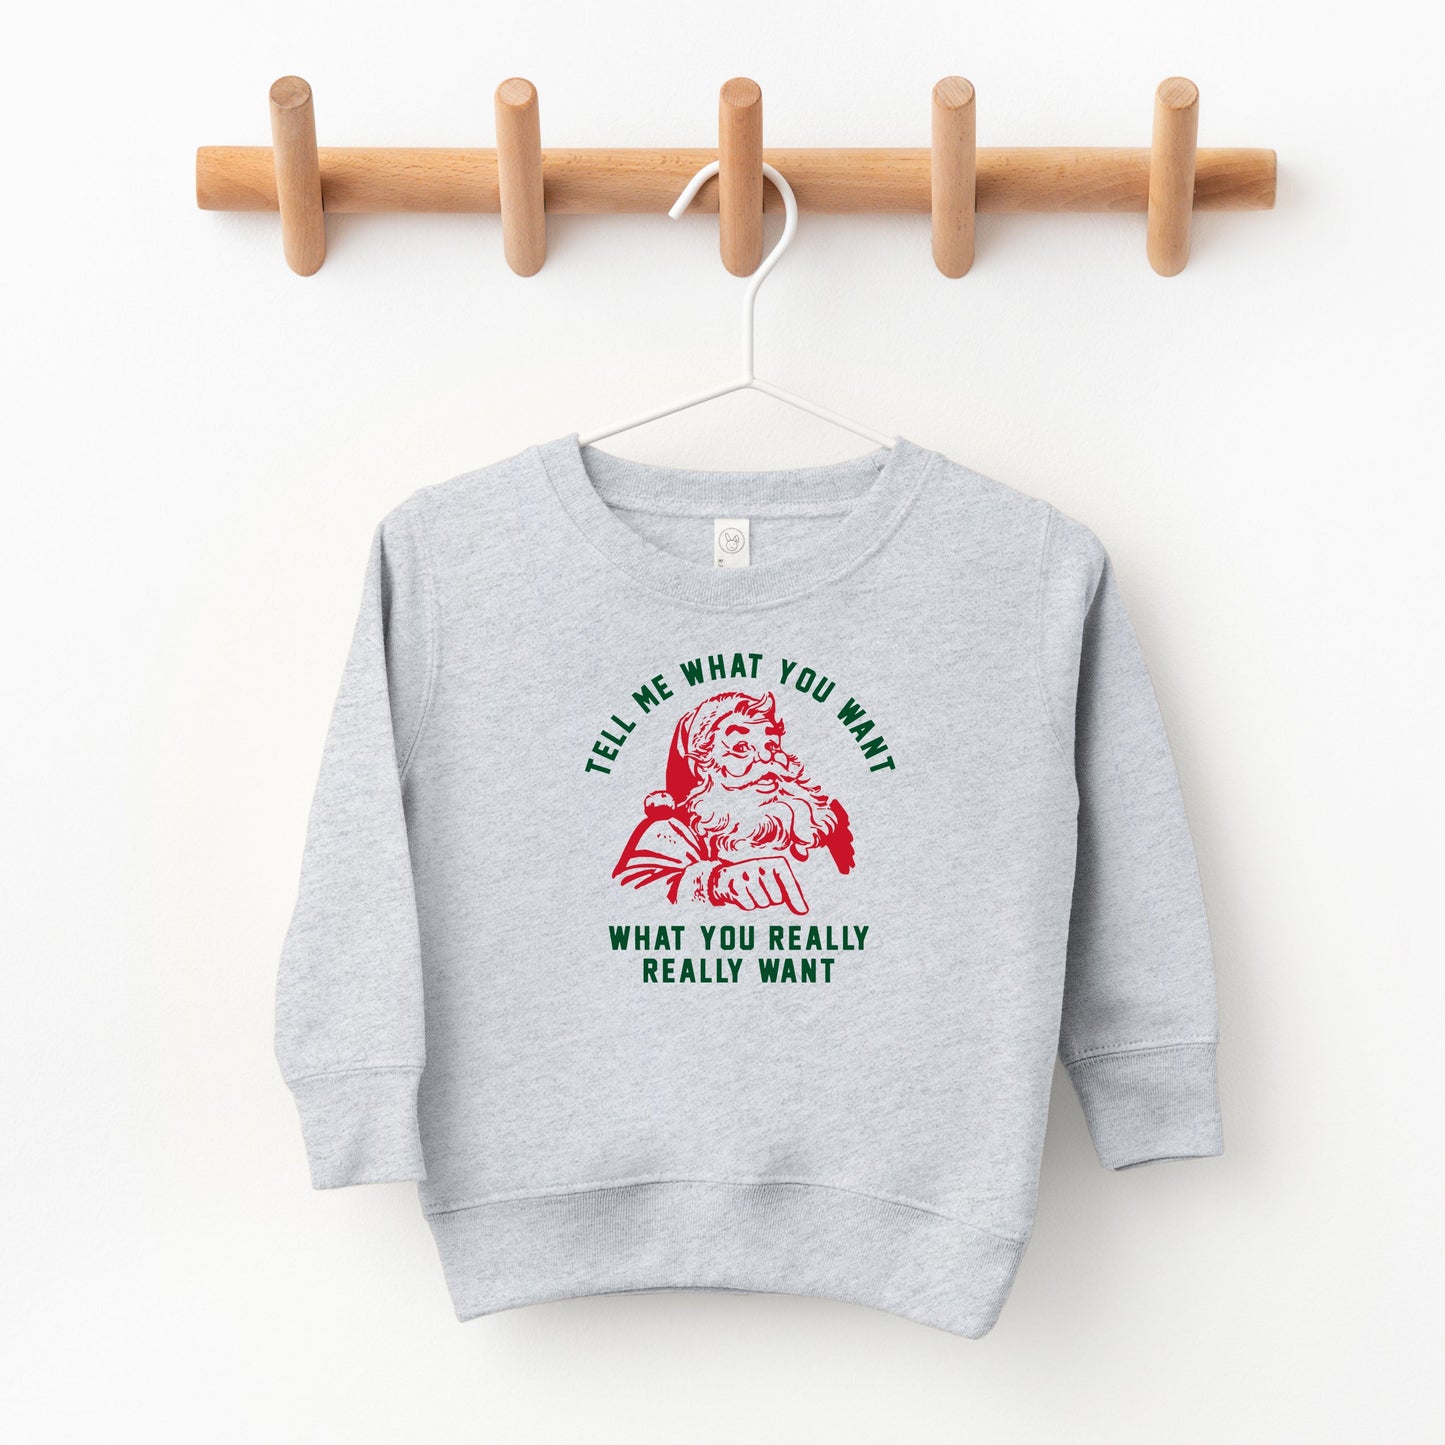 Tell Me What You Want | Toddler Sweatshirt